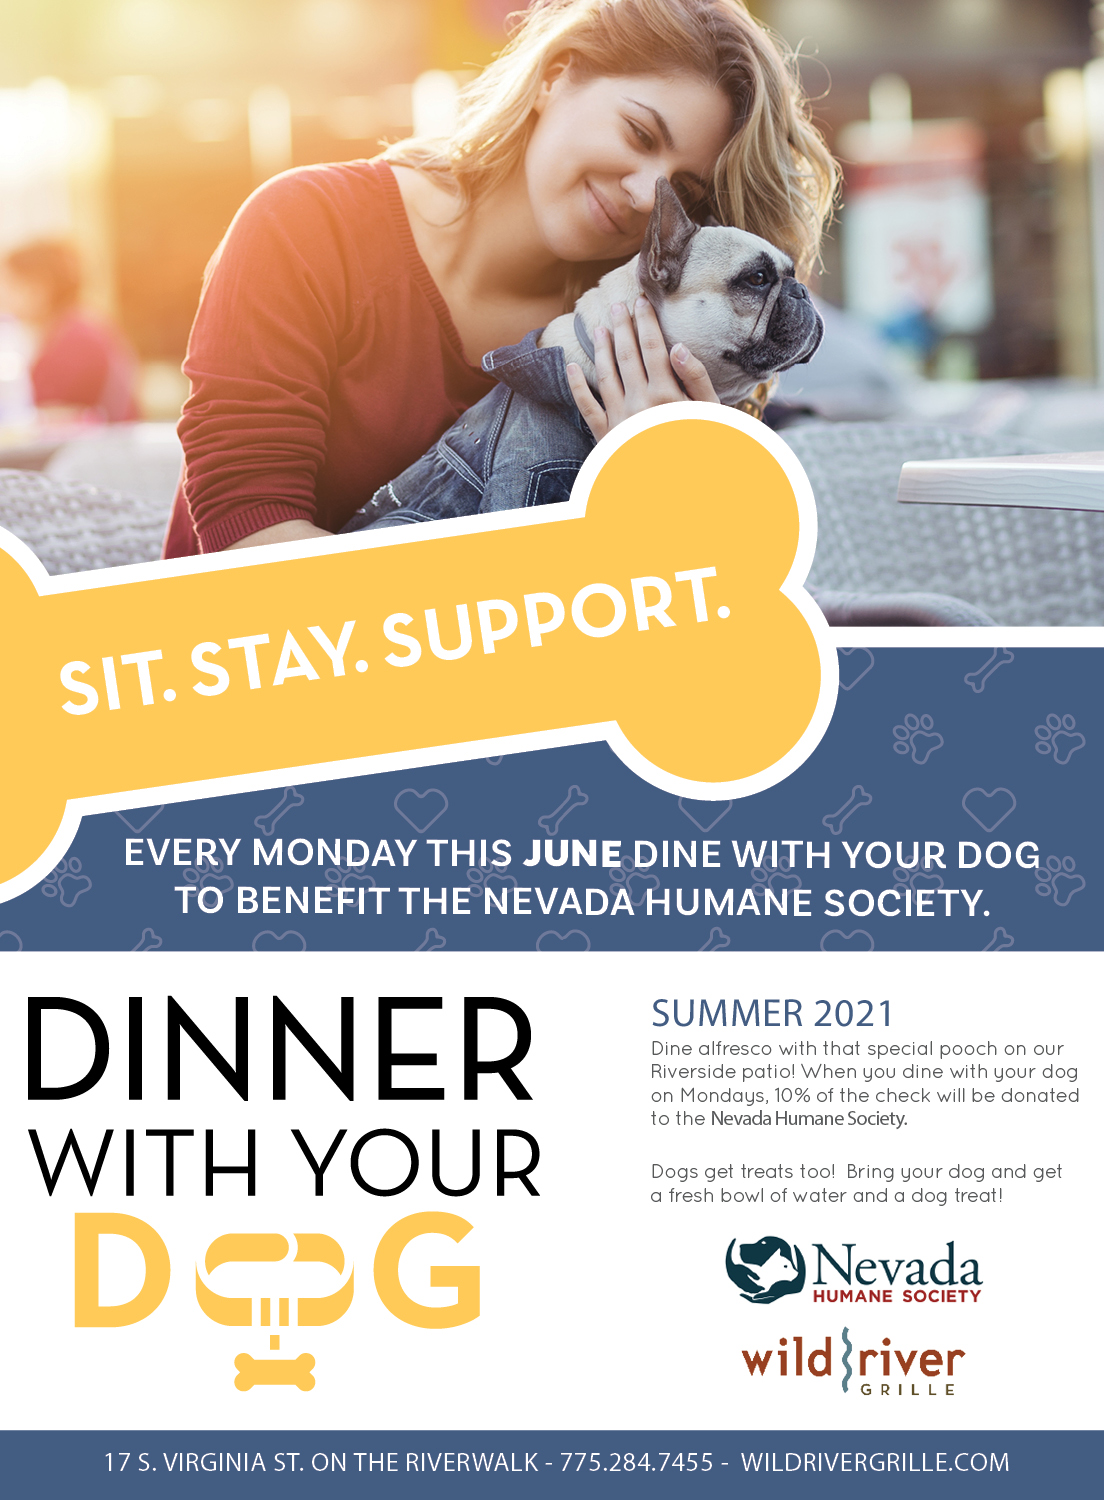 Dinner with your Dog